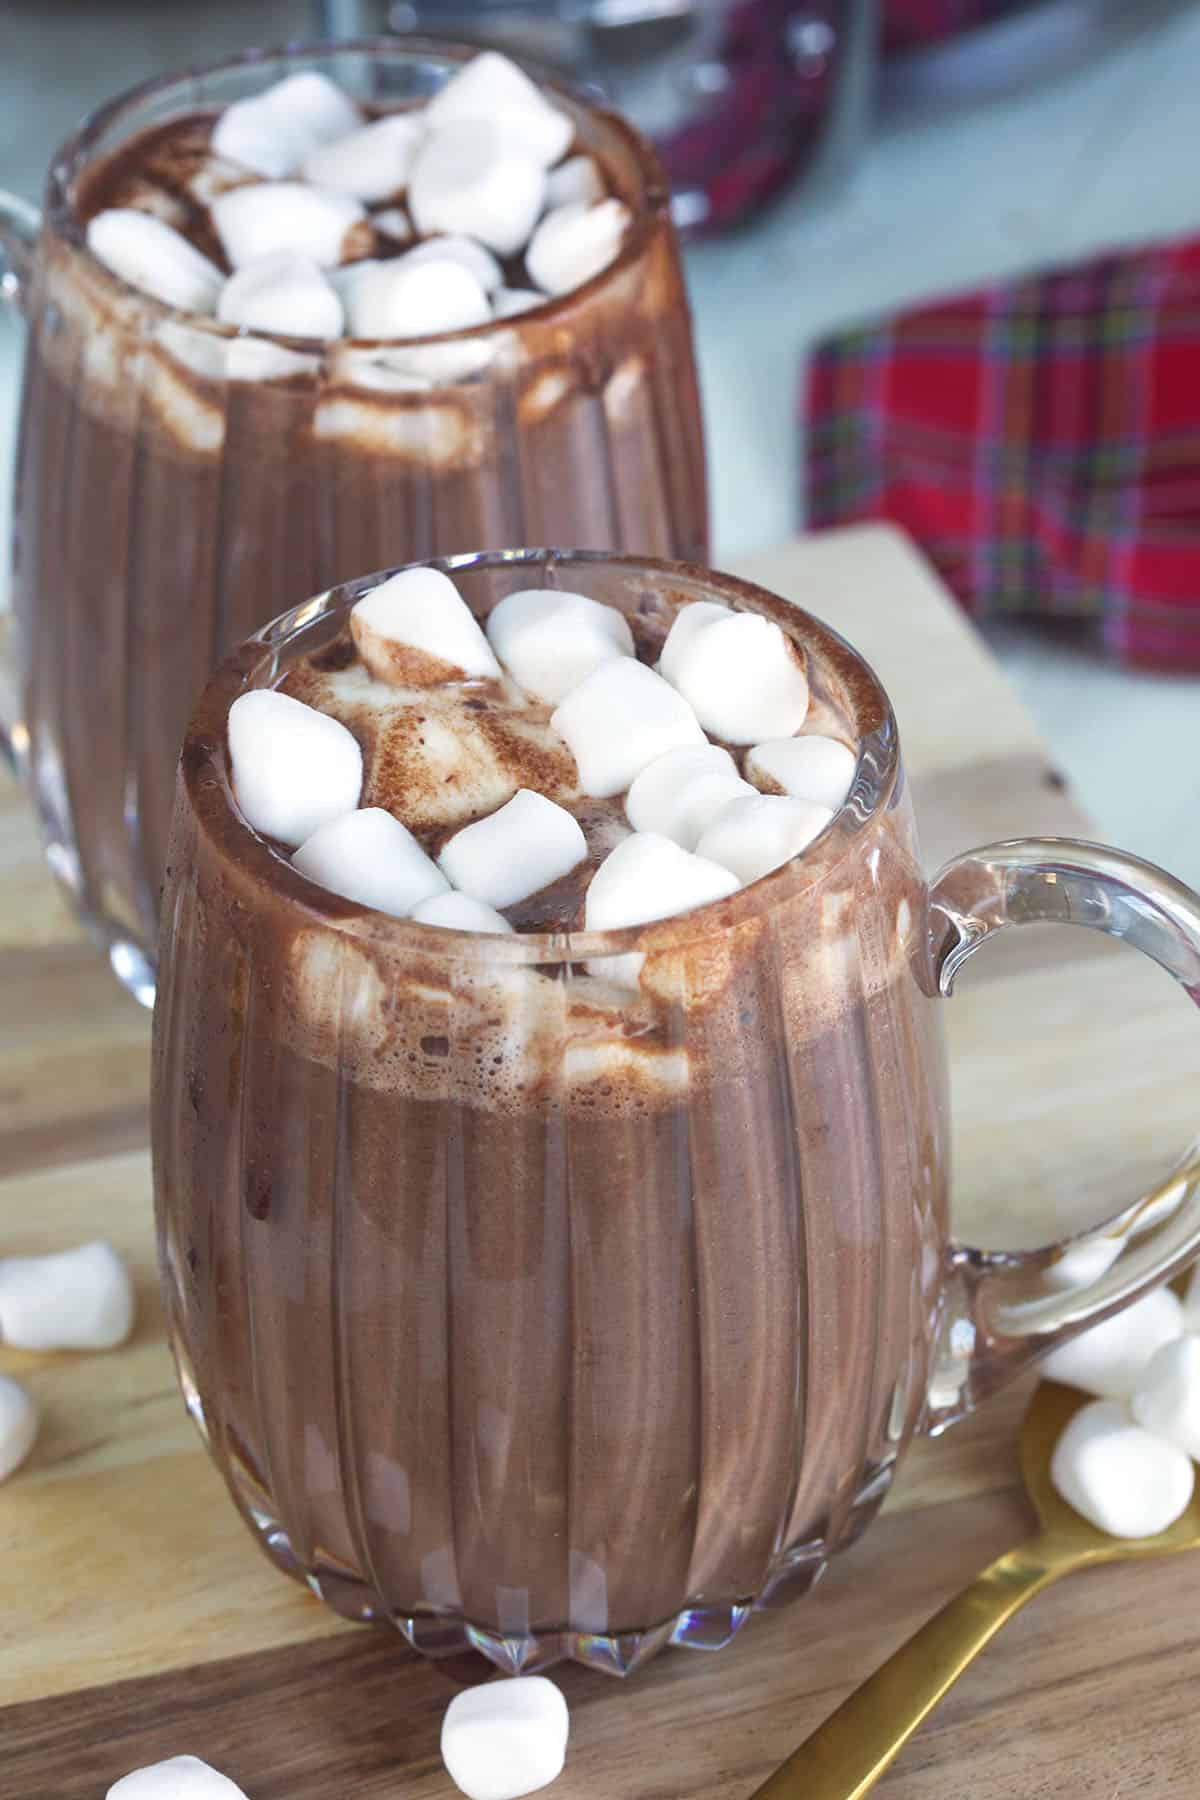 Two glass mugs filled with hot chocolate are placed on a tabletop.